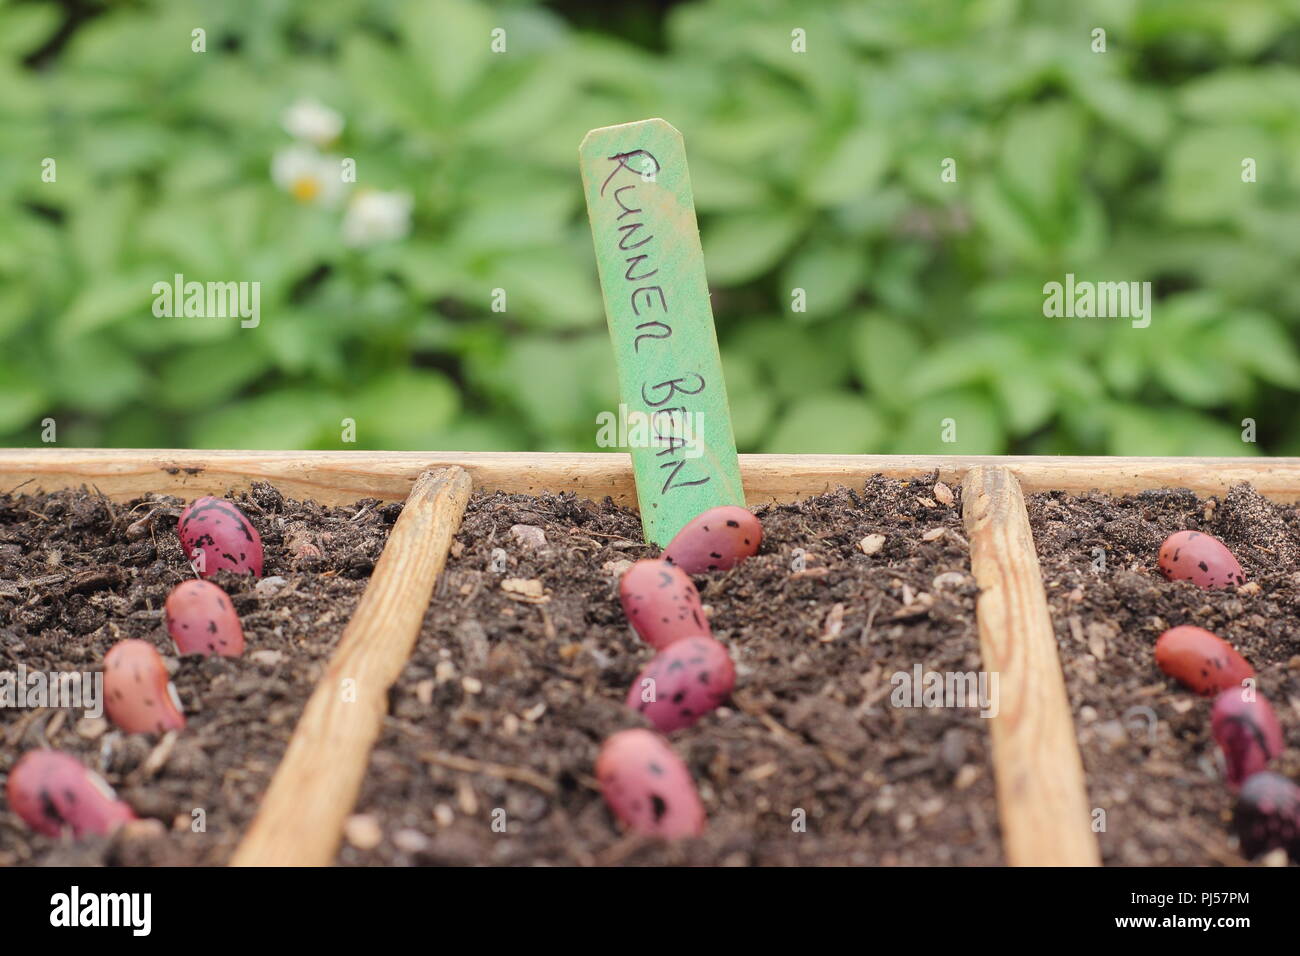 Phaseolus coccineus. Sowing runner bean 'Enorma' seeds in a wooden seed tray, UK Stock Photo